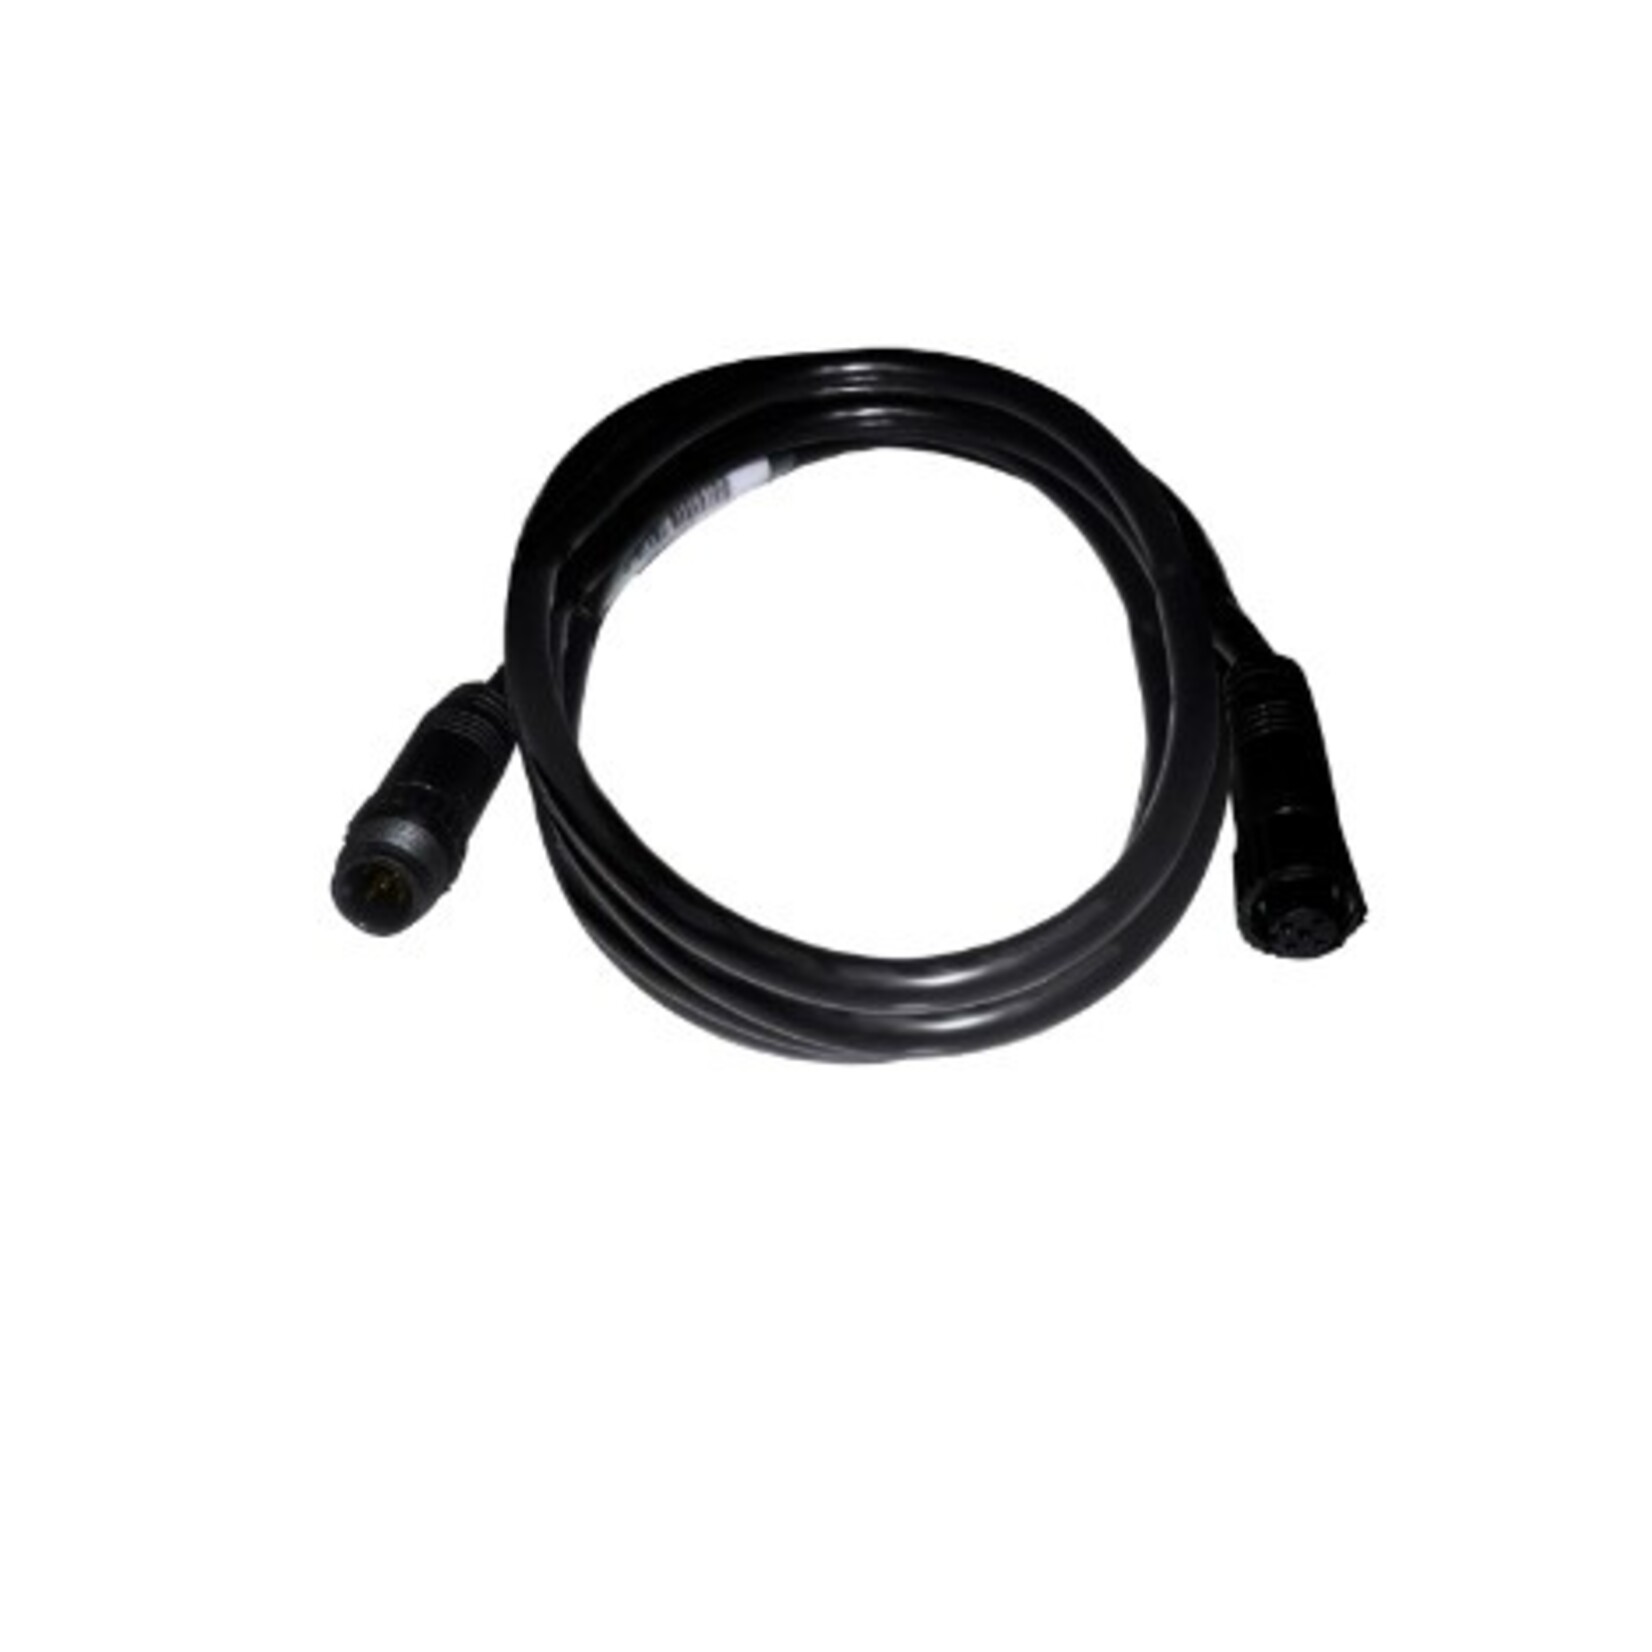 N2K Cable - 4.5m (15ft)